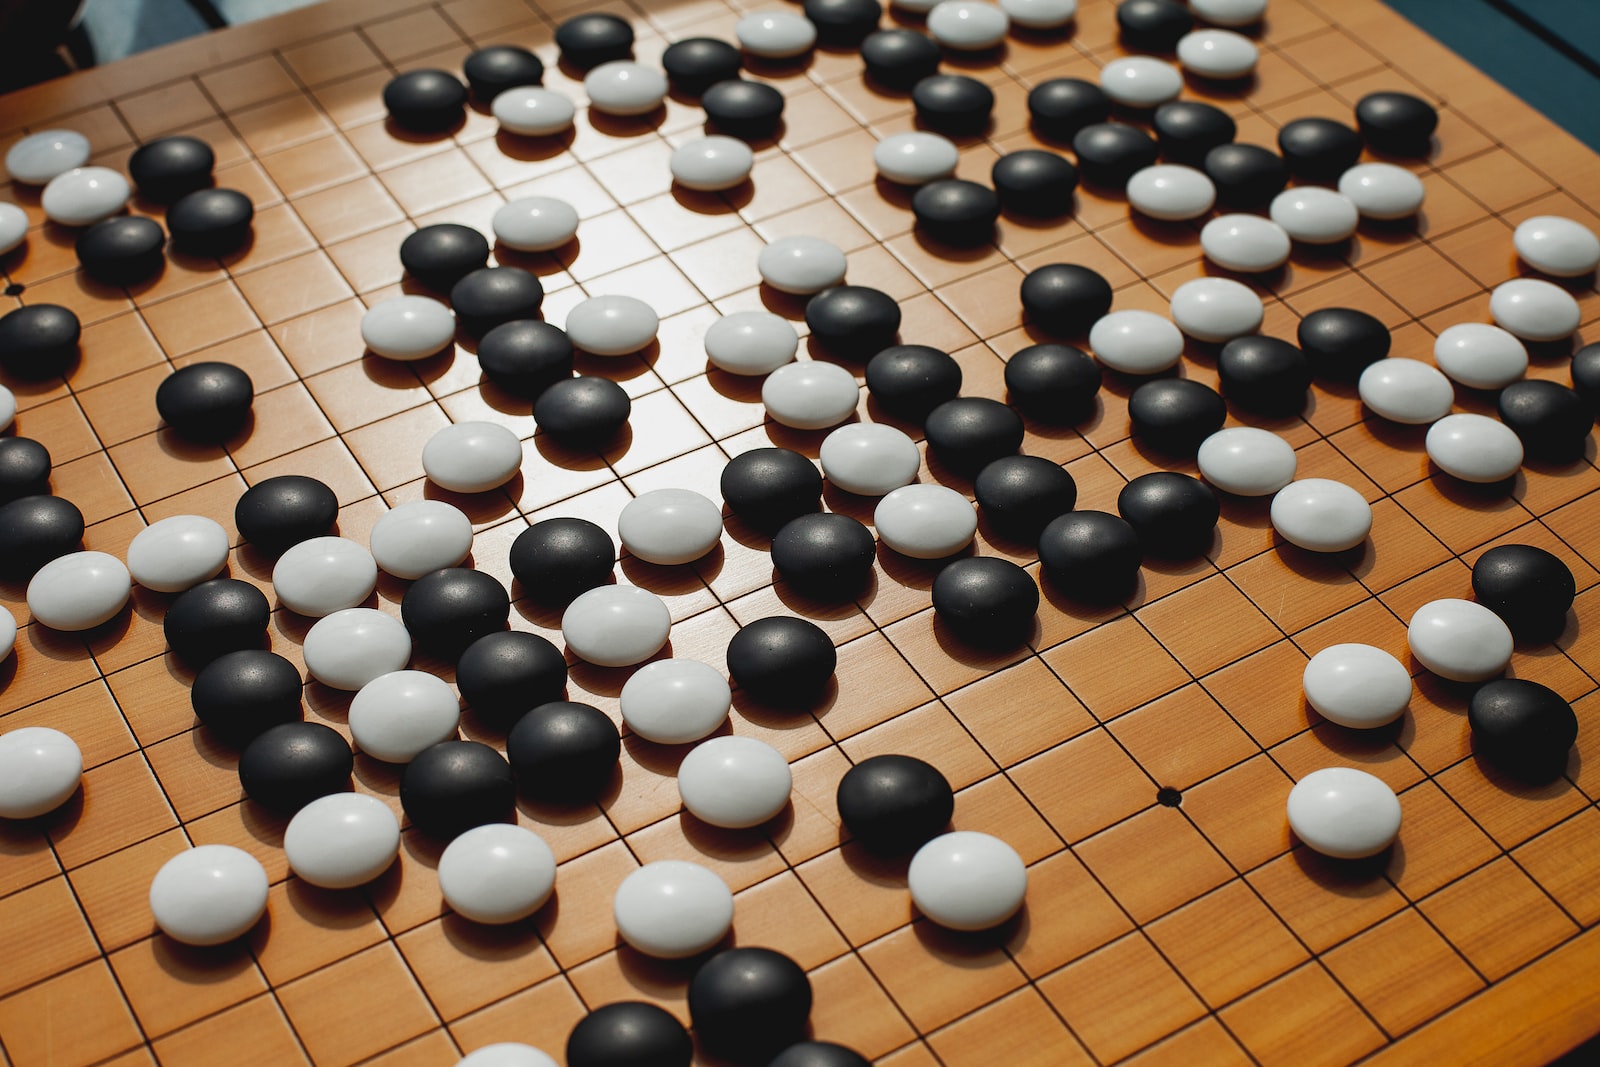 Weakness in AI systems playing Go